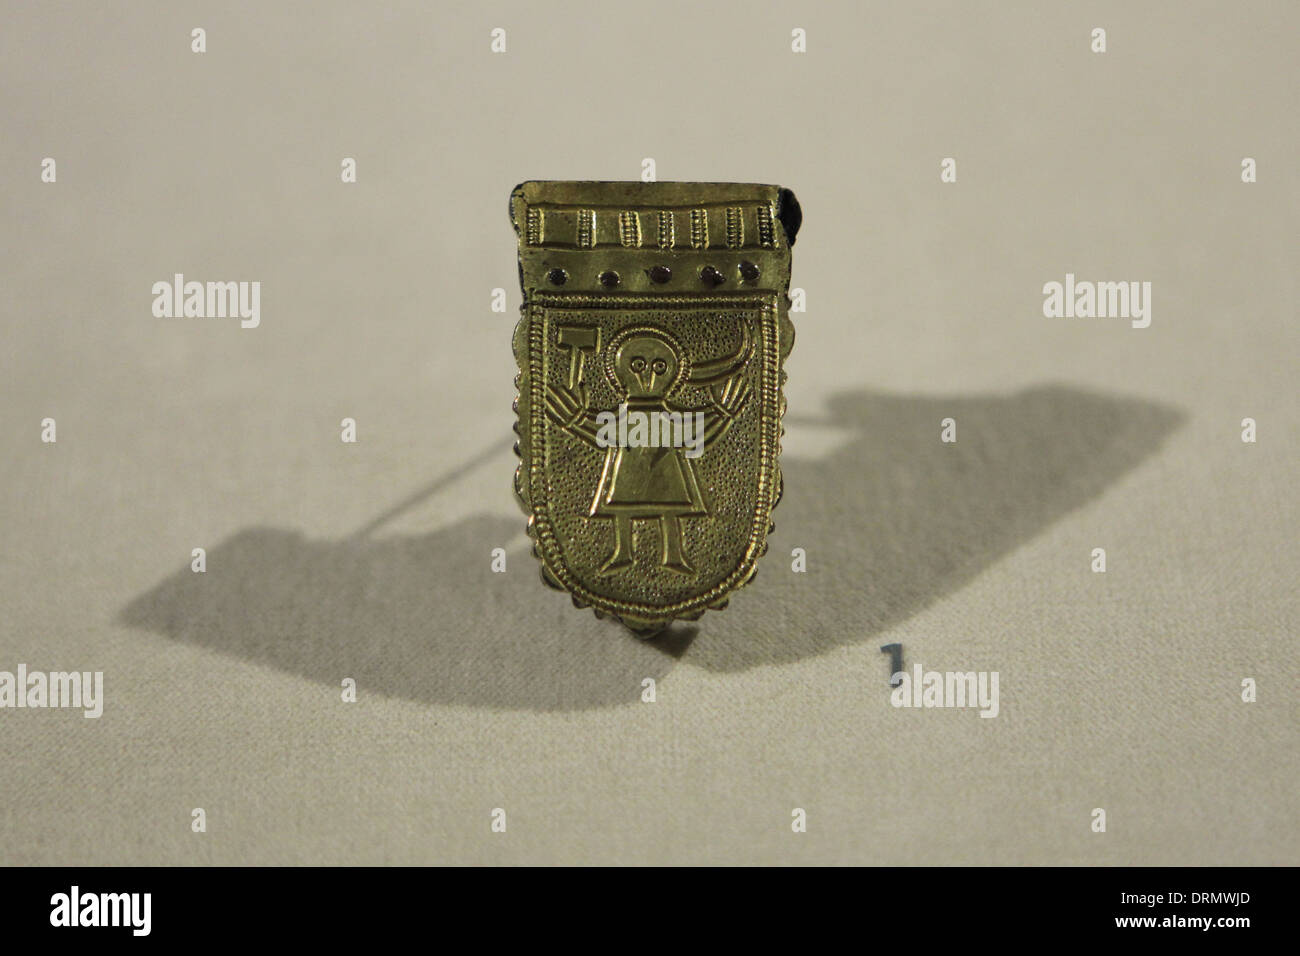 Great Moravian Empire. Gilt belt ferrule decorated with a human figure from the 9th century, found in Mikulcice. Stock Photo